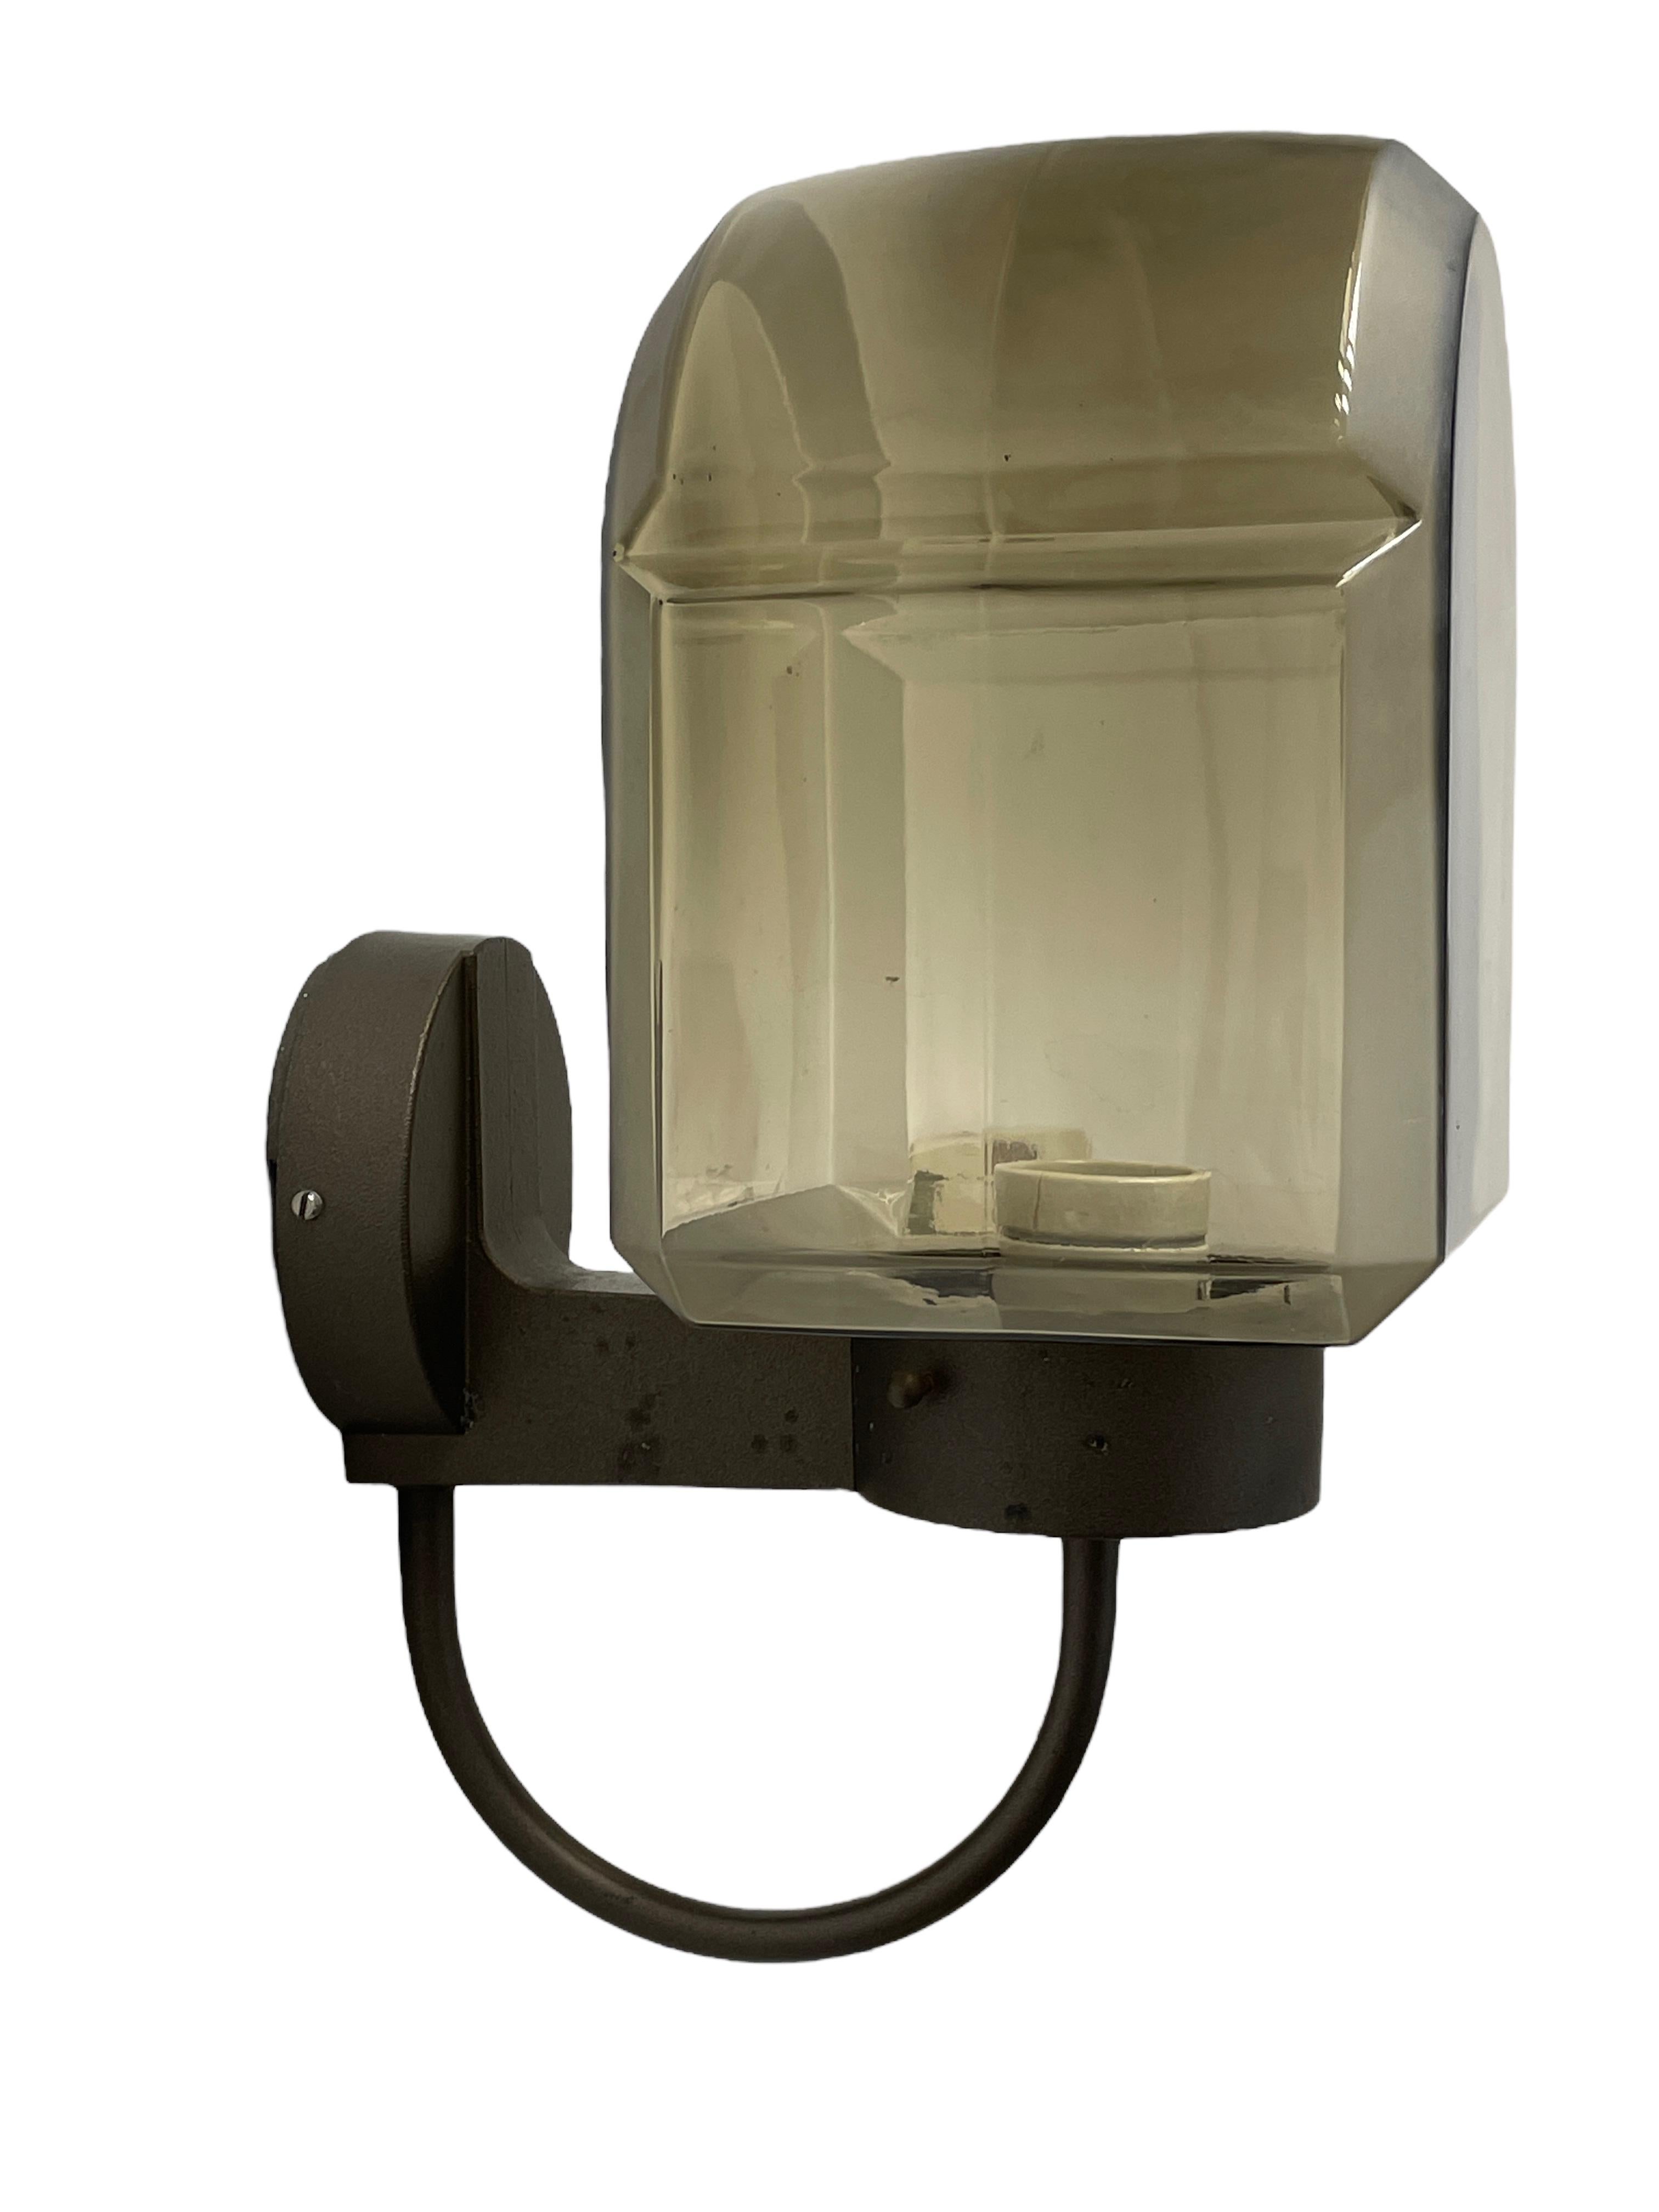 Late 20th Century Patio or Outdoor Modernist Glass Wall Light Sconce, Germany, 1980s For Sale